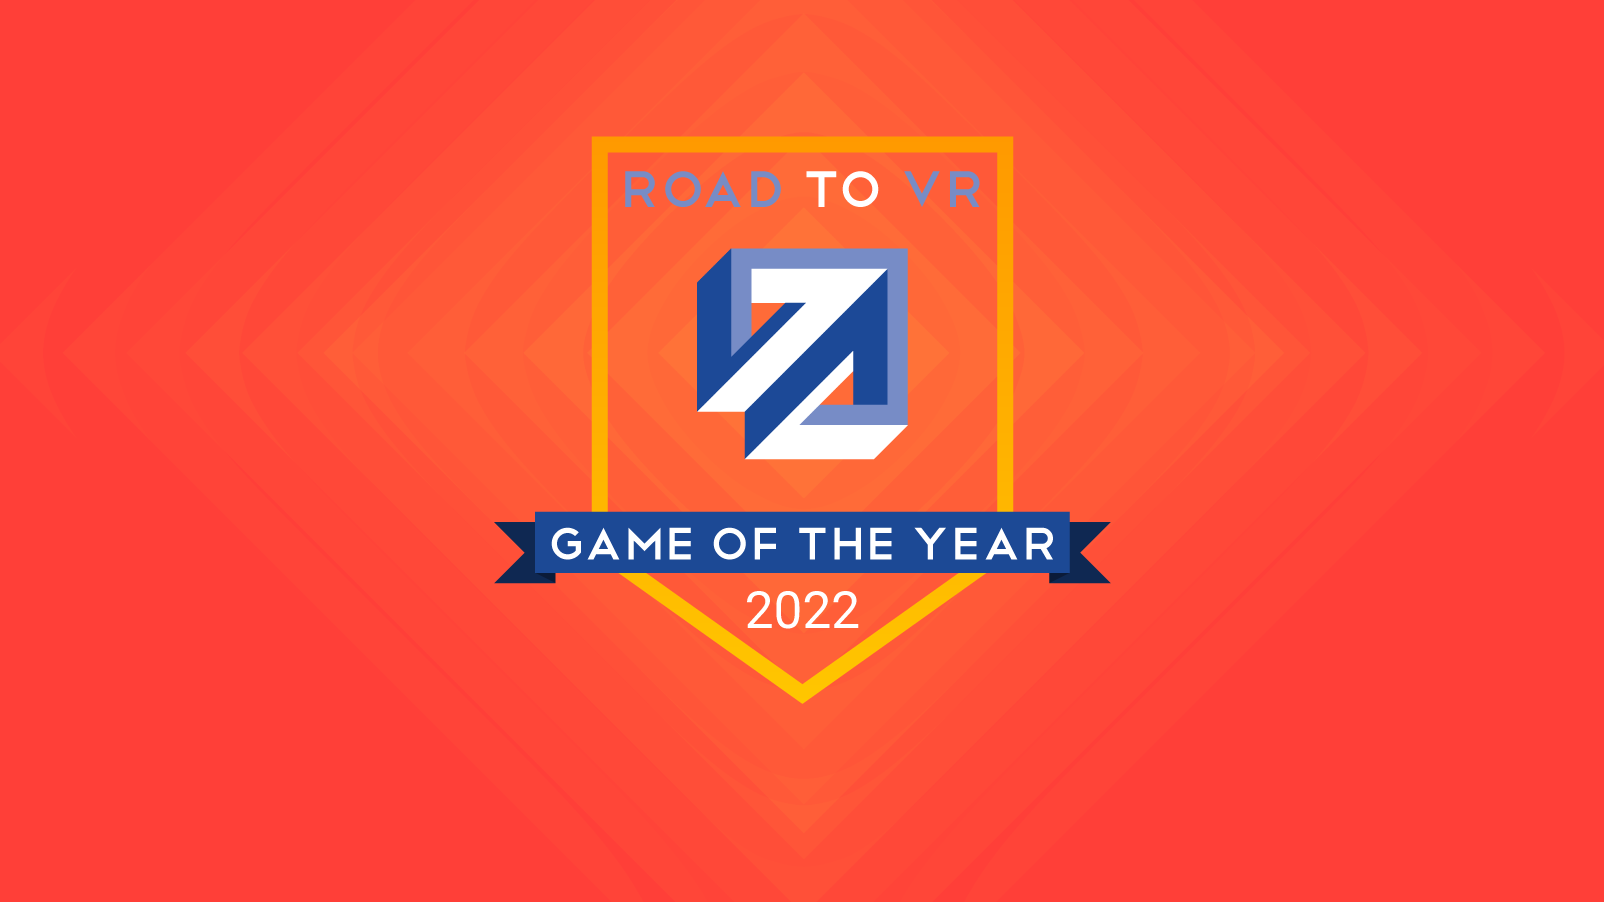 Road to VR's 2019 Game of the Year Awards